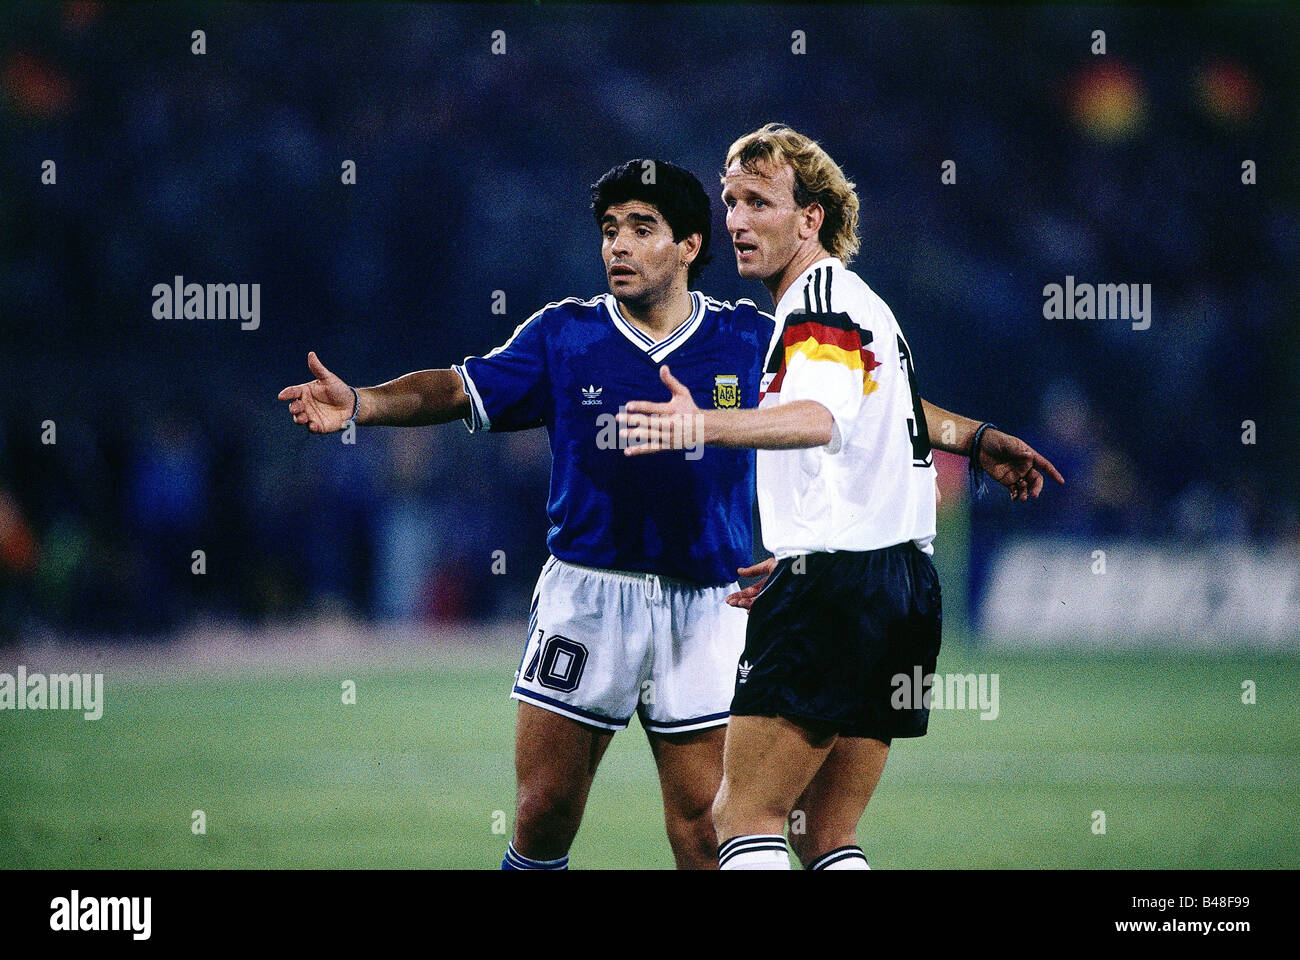 Sport / Sports, soccer, football, World Cup 1990, final round, final, Germany against Argentina, (1:0) in Rome, Italy, 8.7.1990, scene with Diego Maradona and Andreas Brehme, match, historic, historical, 20th century, people, 1990s, Stock Photo